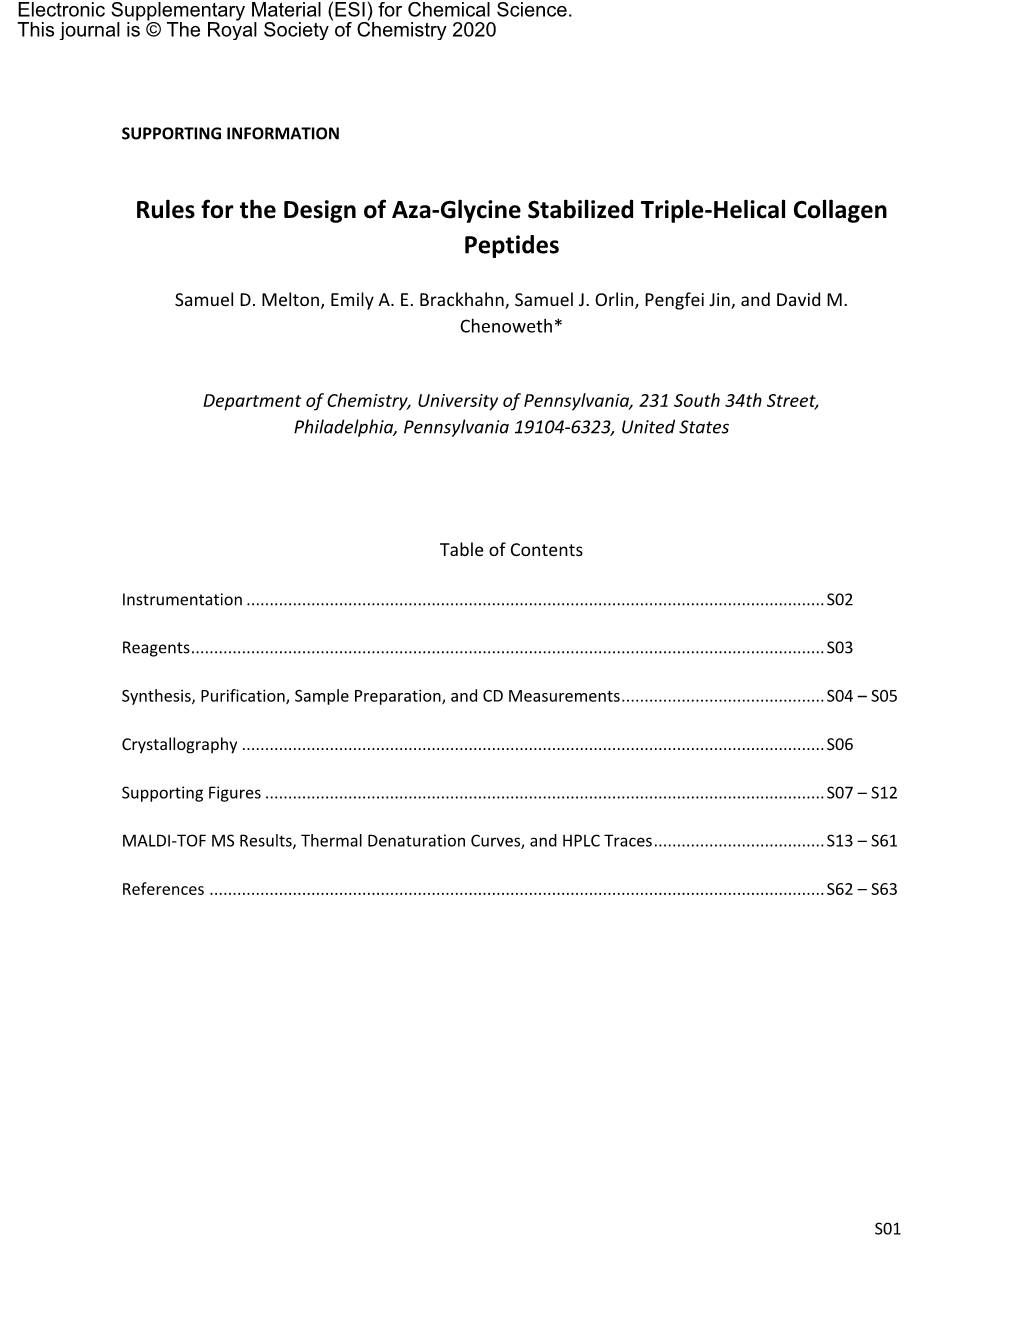 Rules for the Design of Aza-Glycine Stabilized Triple-Helical Collagen Peptides